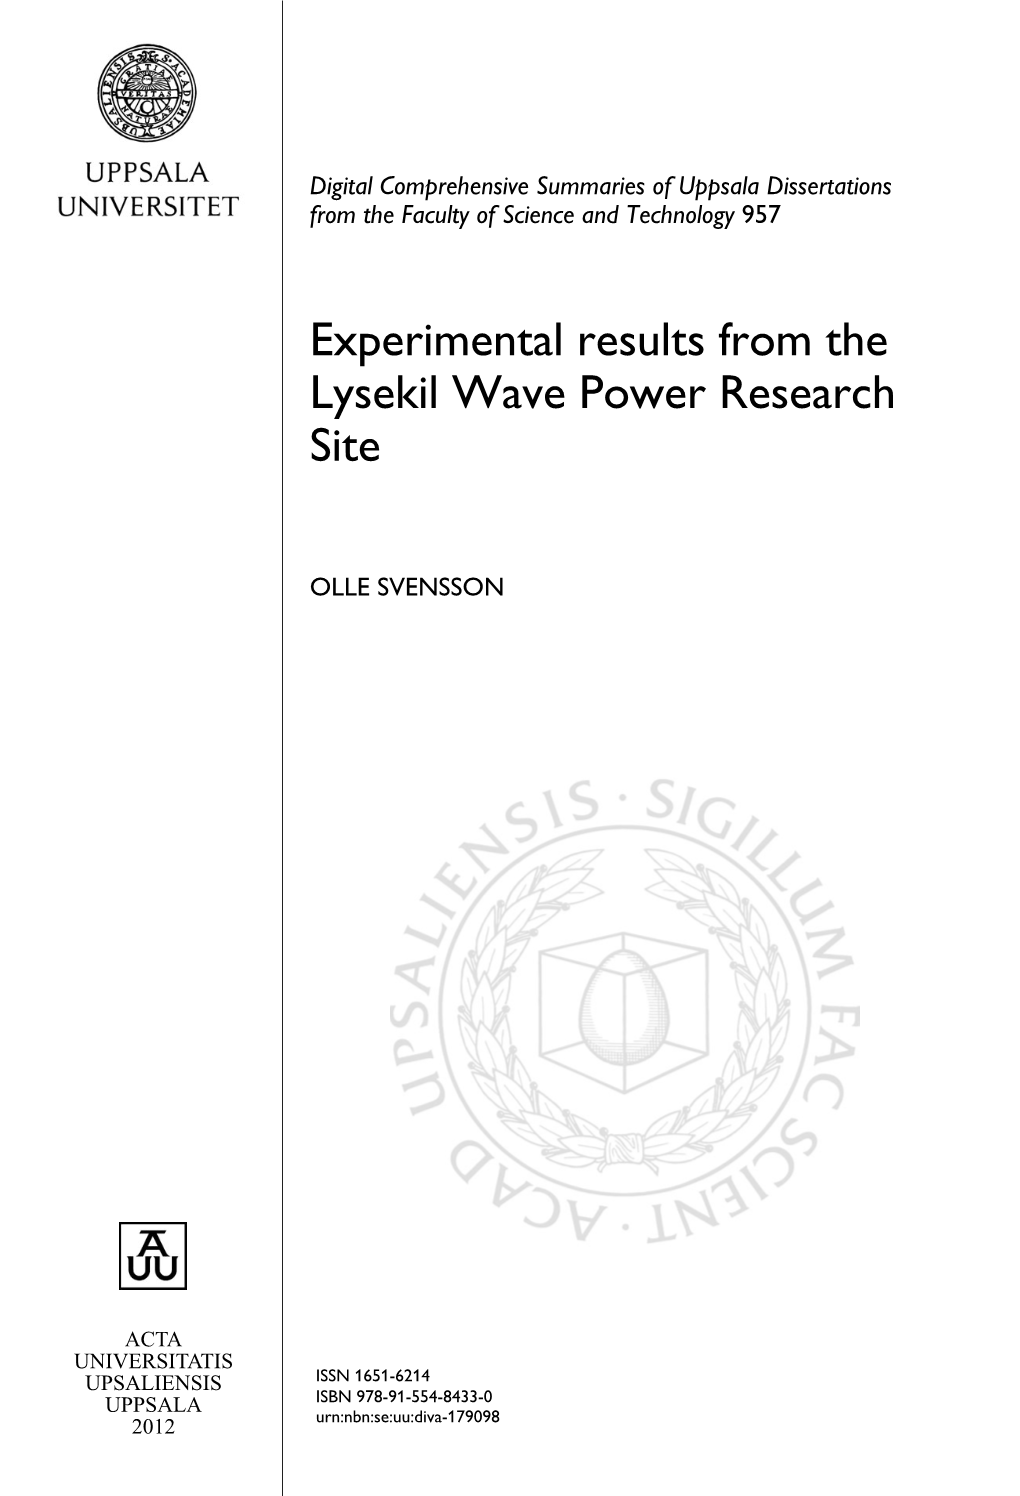 Experimental Results from the Lysekil Wave Power Research Site